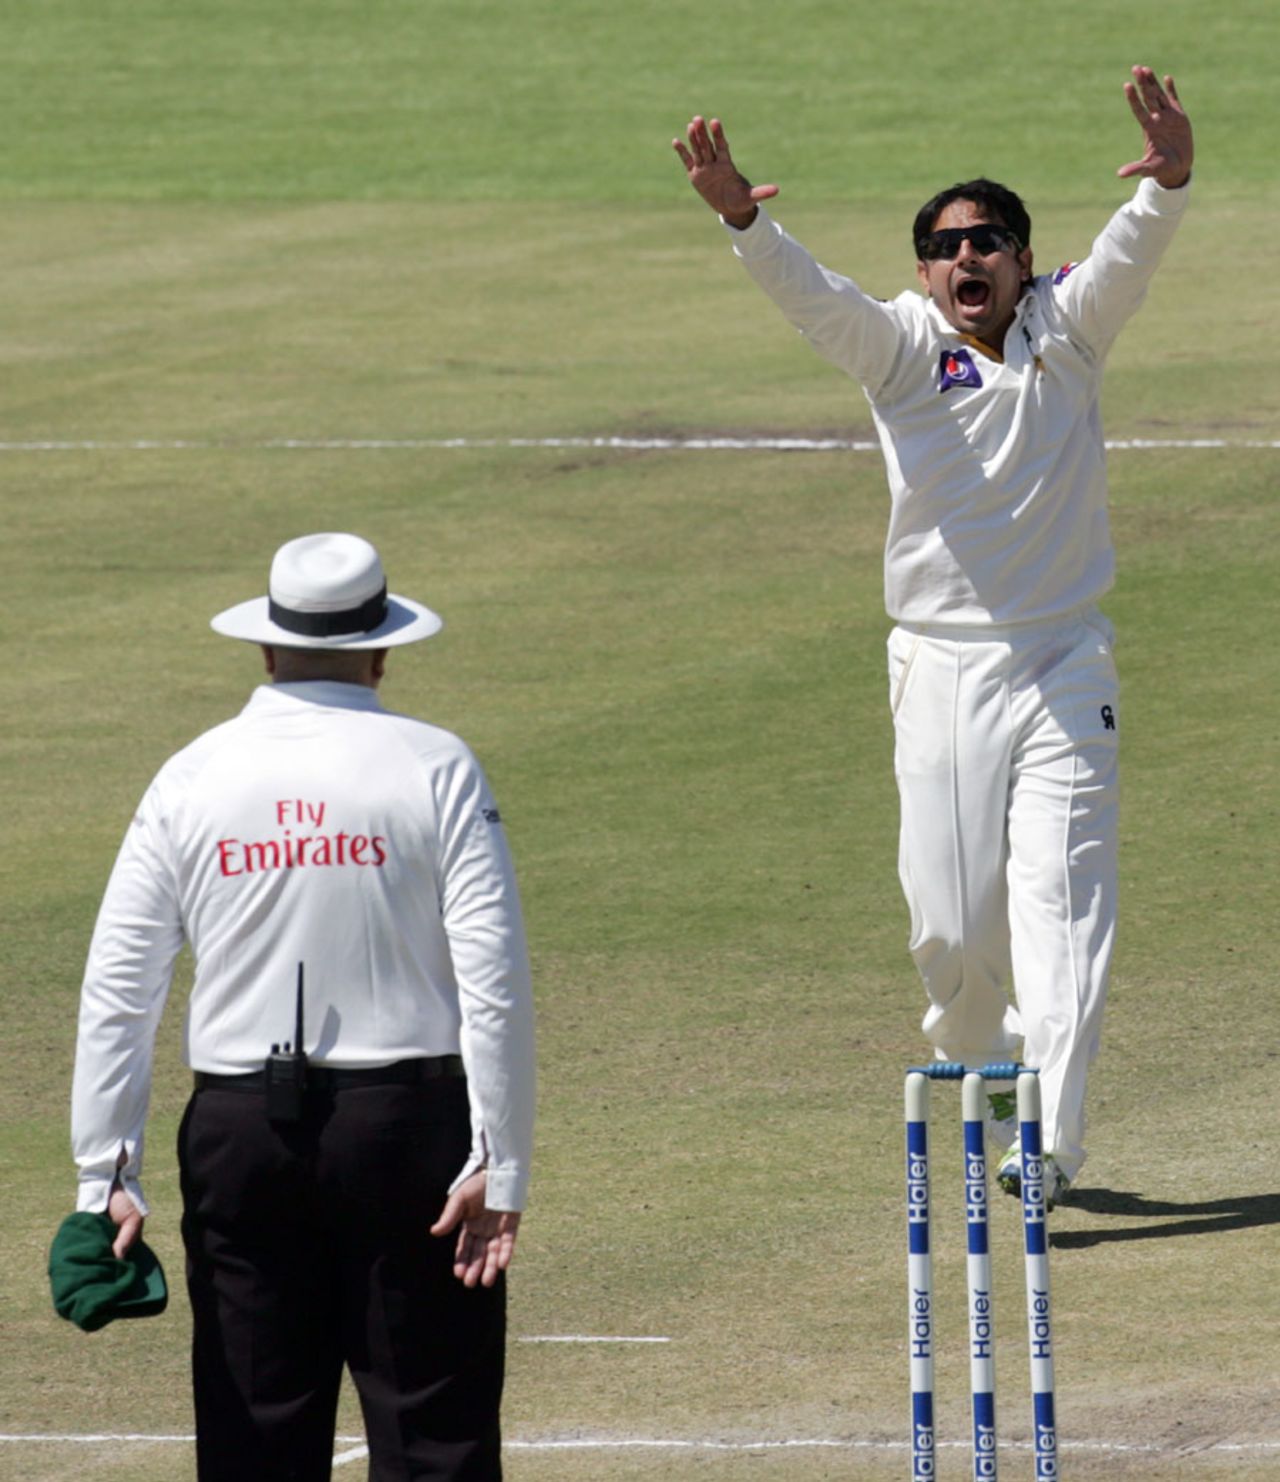 Saeed Ajmal picked up his eighth five-wicket haul, Zimbabwe v Pakistan, 1st Test, 3rd day, Harare, September 5, 2013